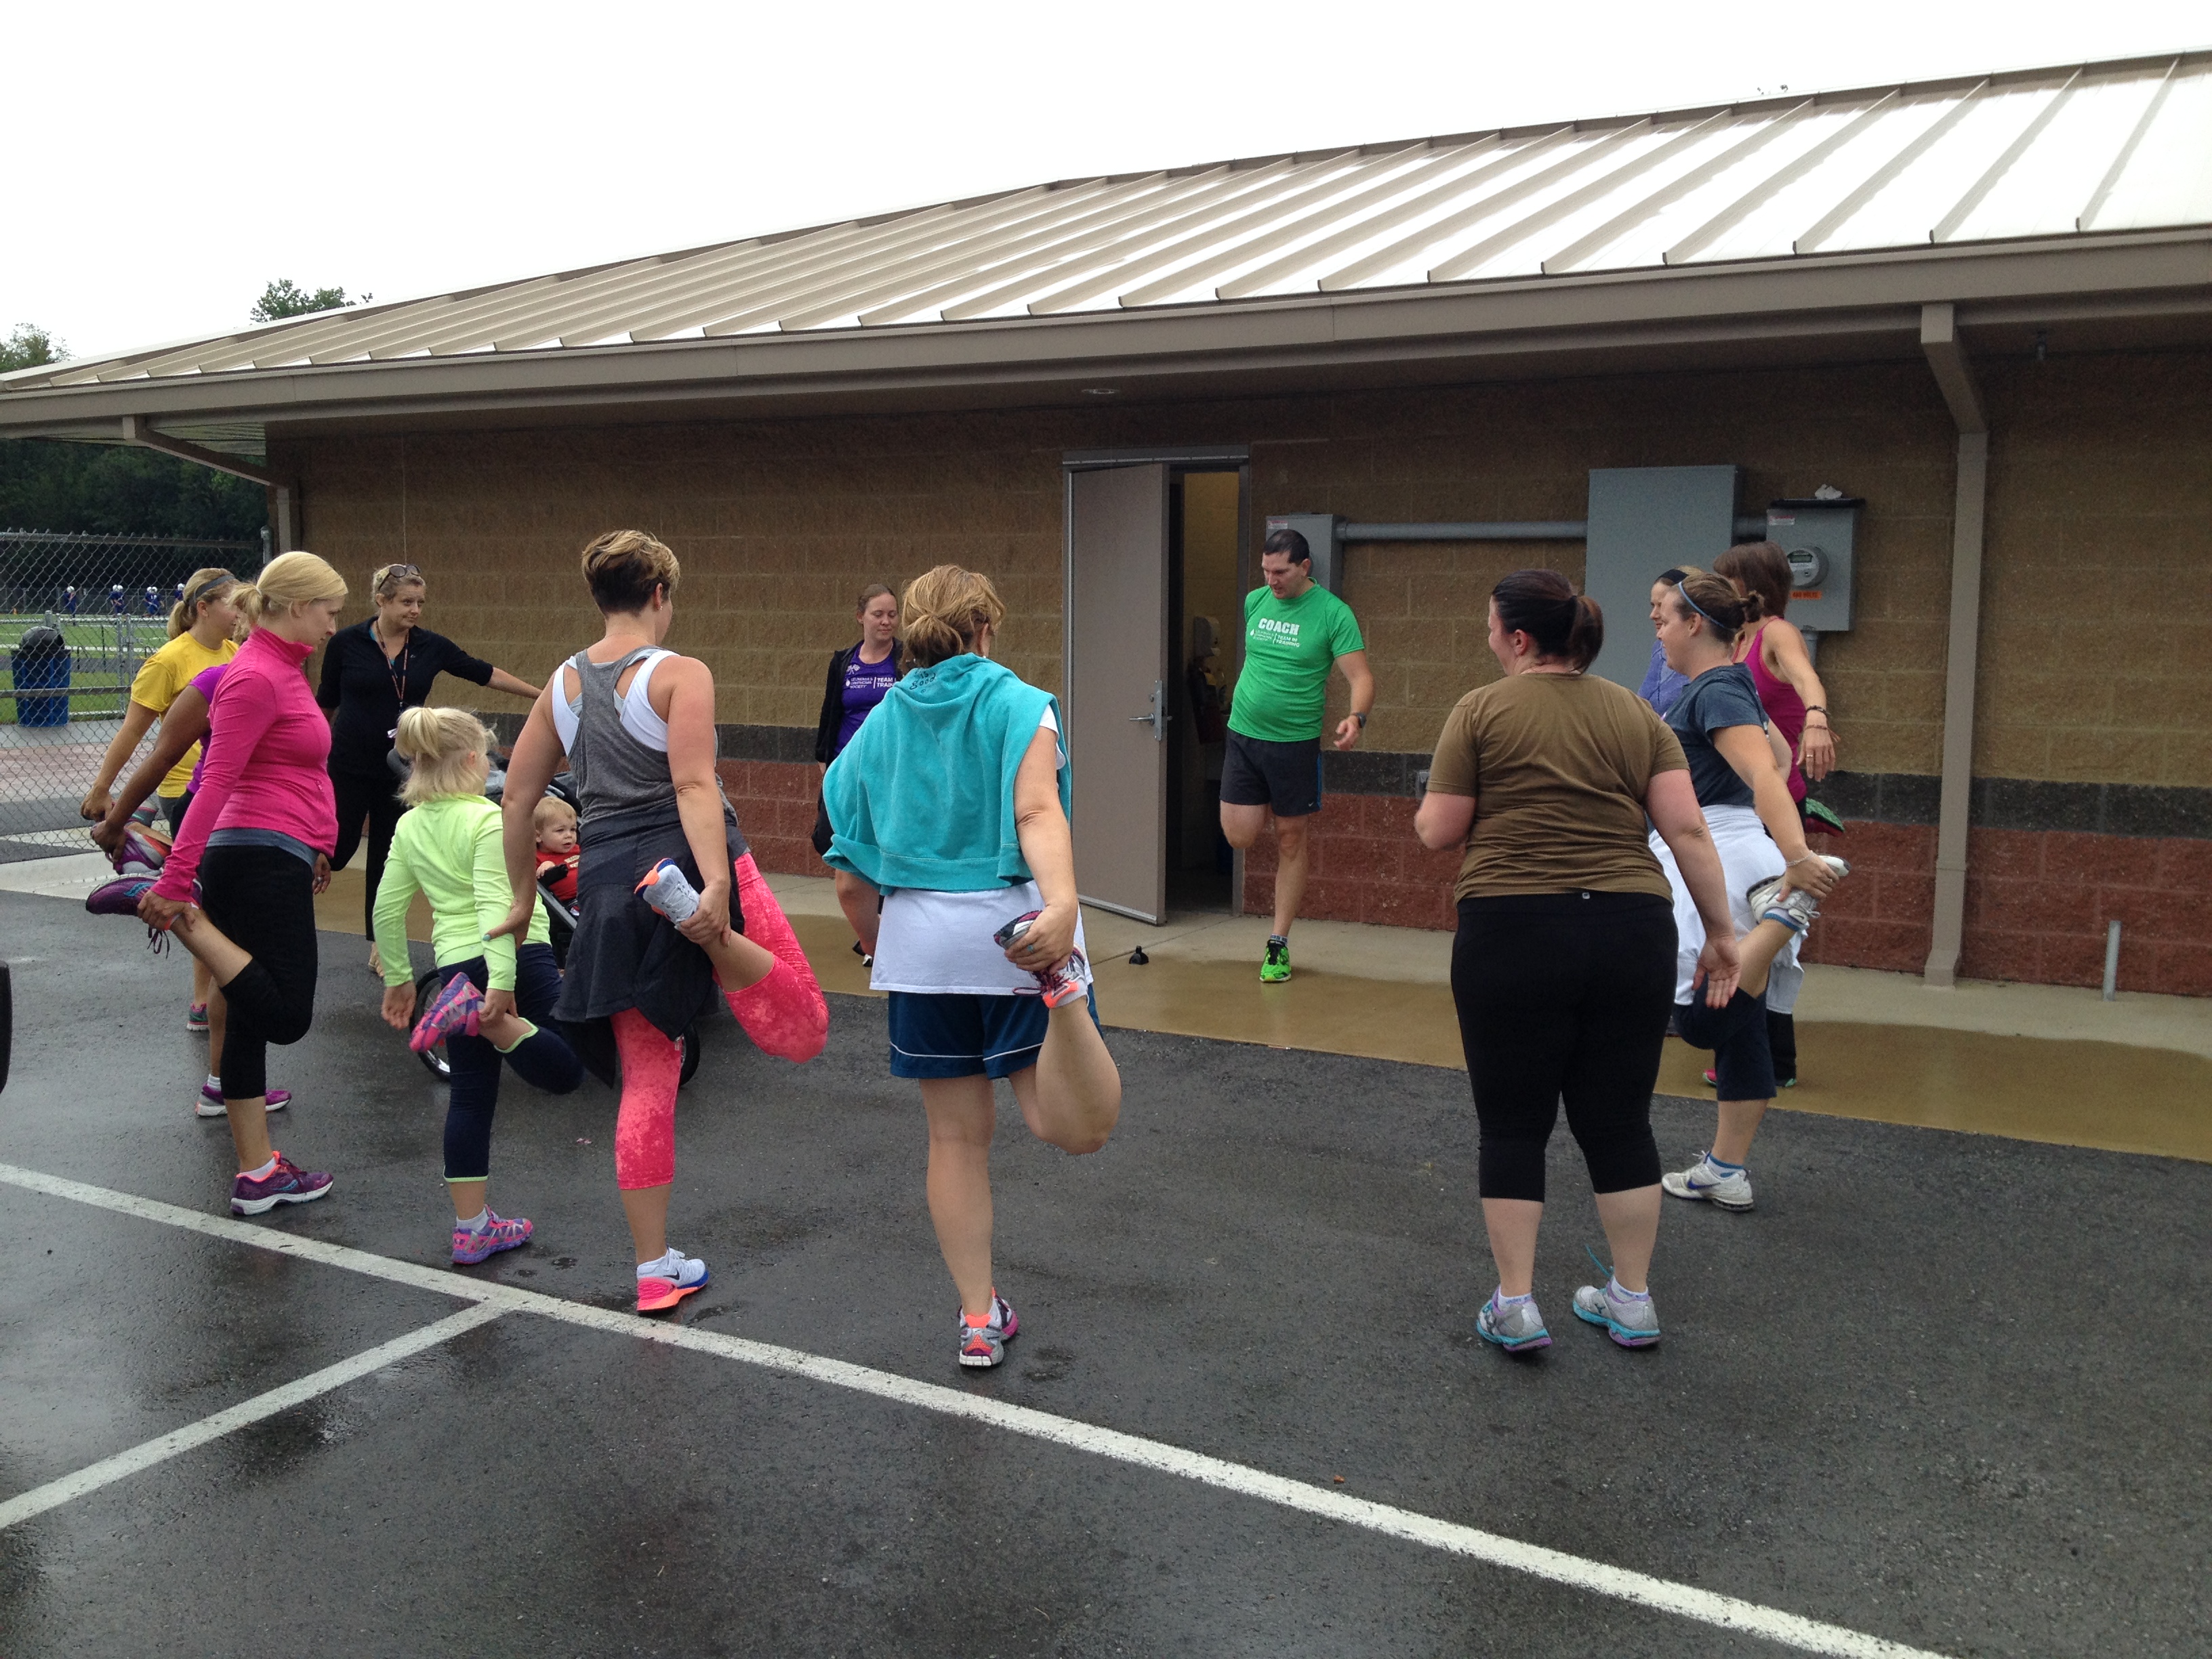 Moms In Training participants start their morning workout in Carmel. The MIT ladies will be in the Hit the Bricks 5K Oct. 4. (Submitted photo)